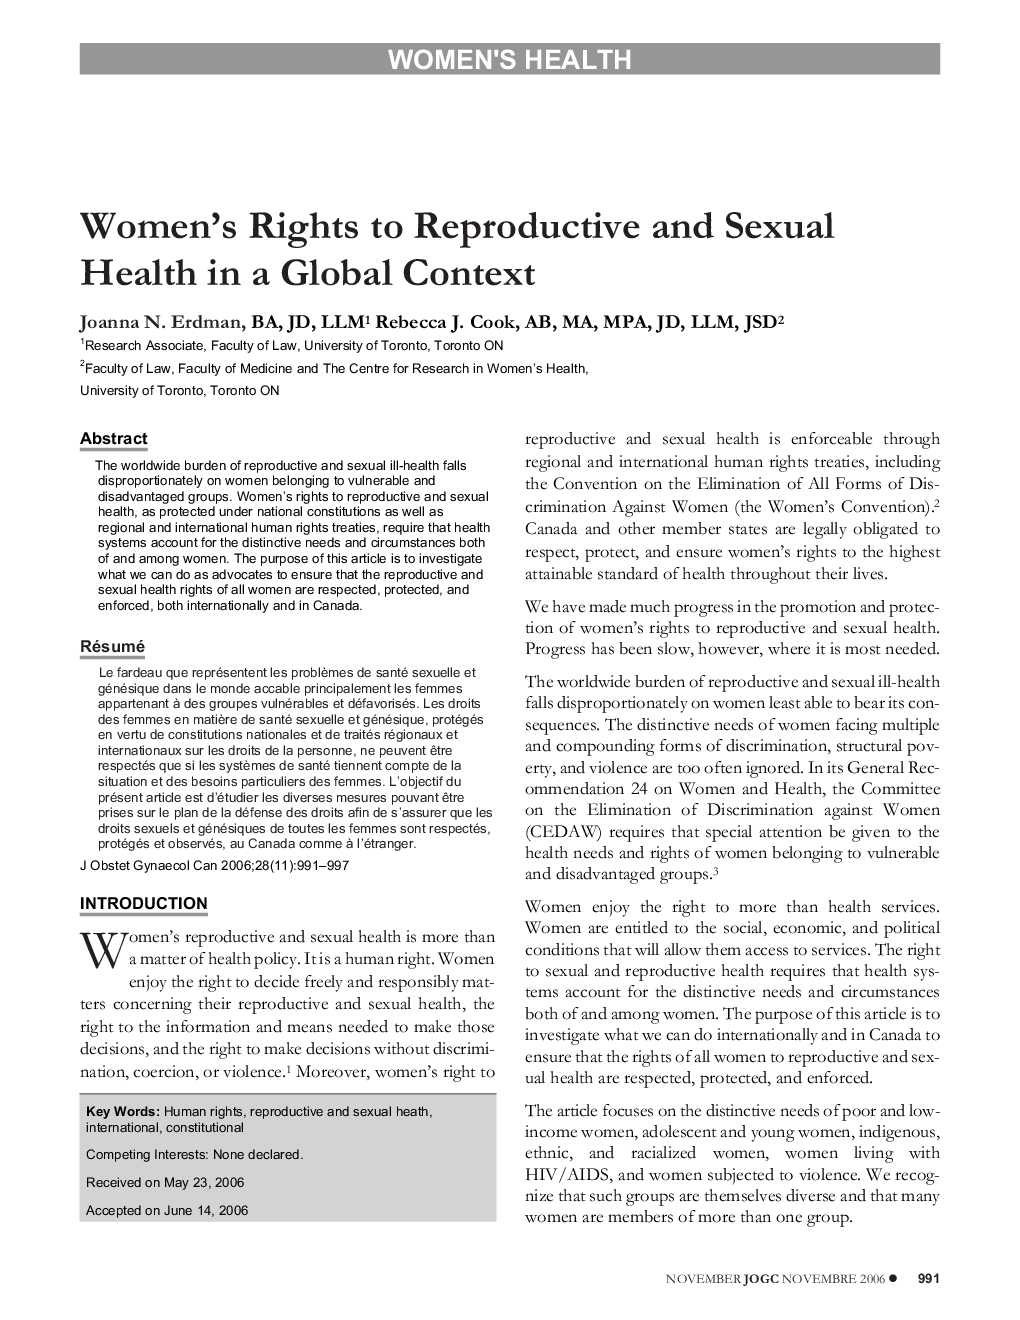 Women's Rights to Reproductive and Sexual Health in a Global Context